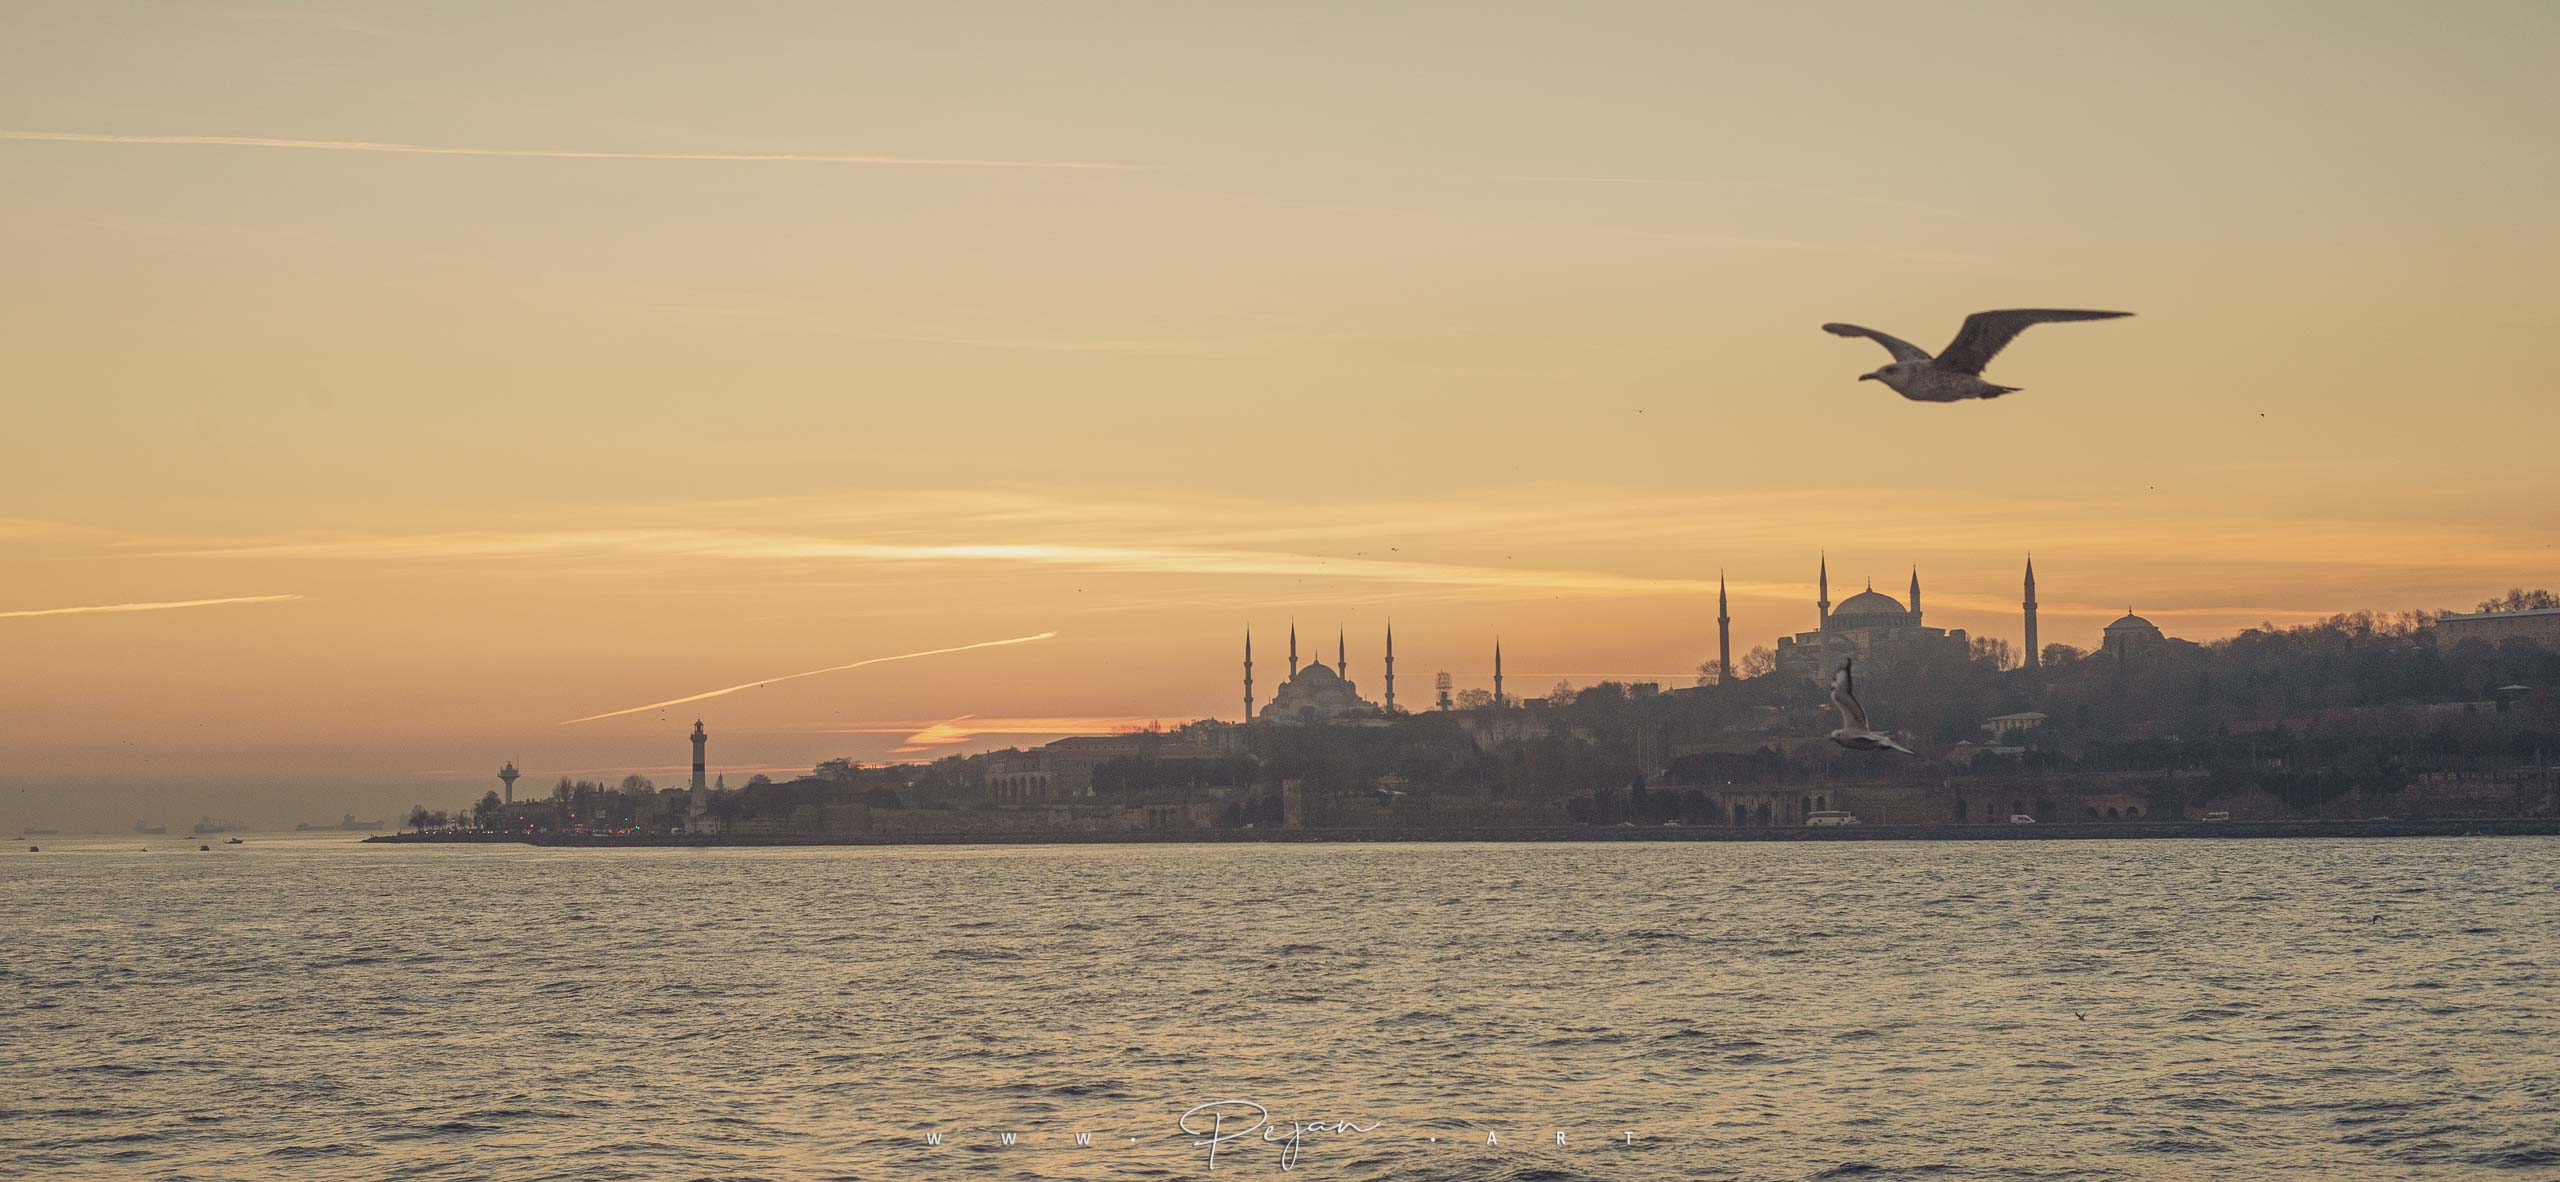 Invitation to travel. Sunset over Istanbul, Turkey, between Europe and Asia. Seagulls fly over the Bosphorus in front of a golden sky.